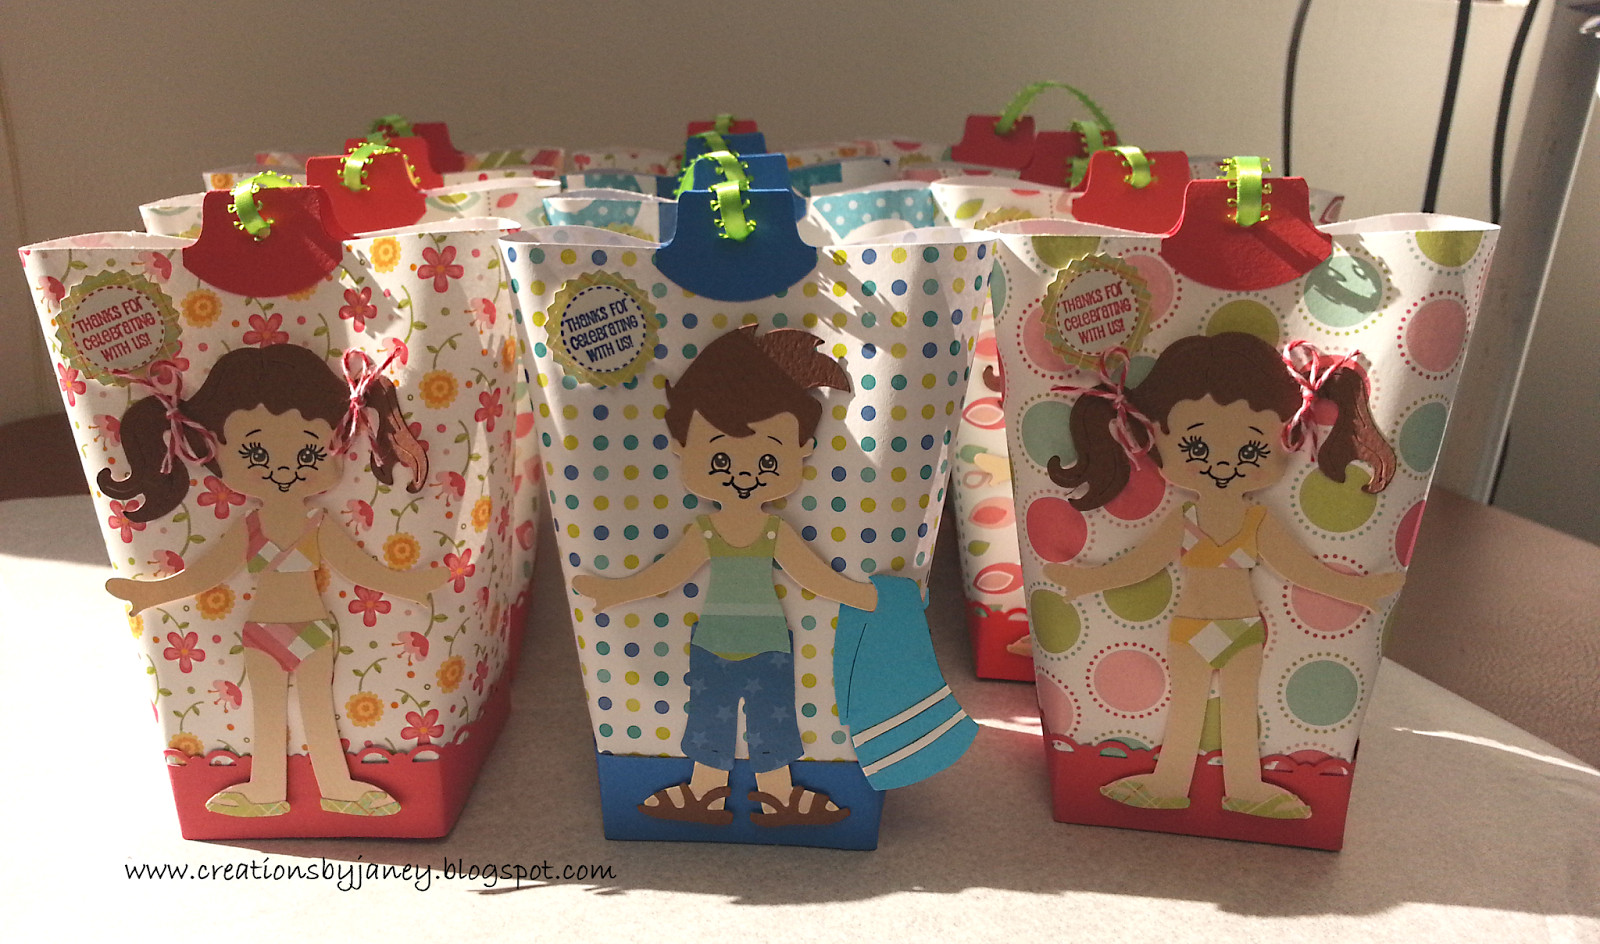 Pool Party Goody Bags Ideas
 Creations by Janey Pool party treat bags